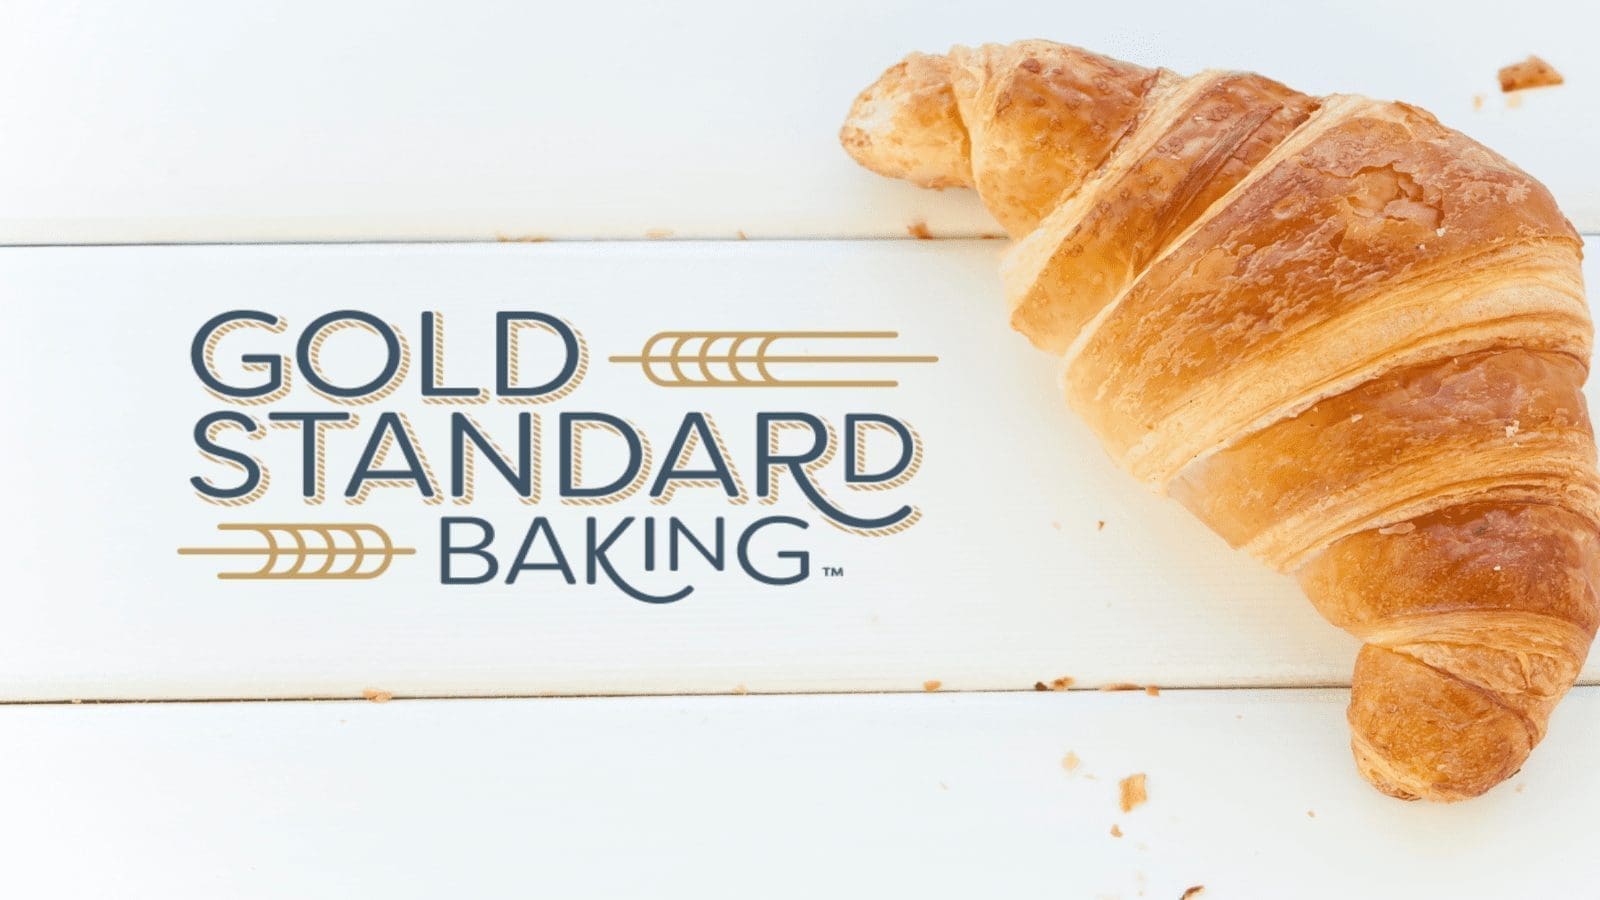 Gold Standard Baking acquired by 37 Baking Holdings